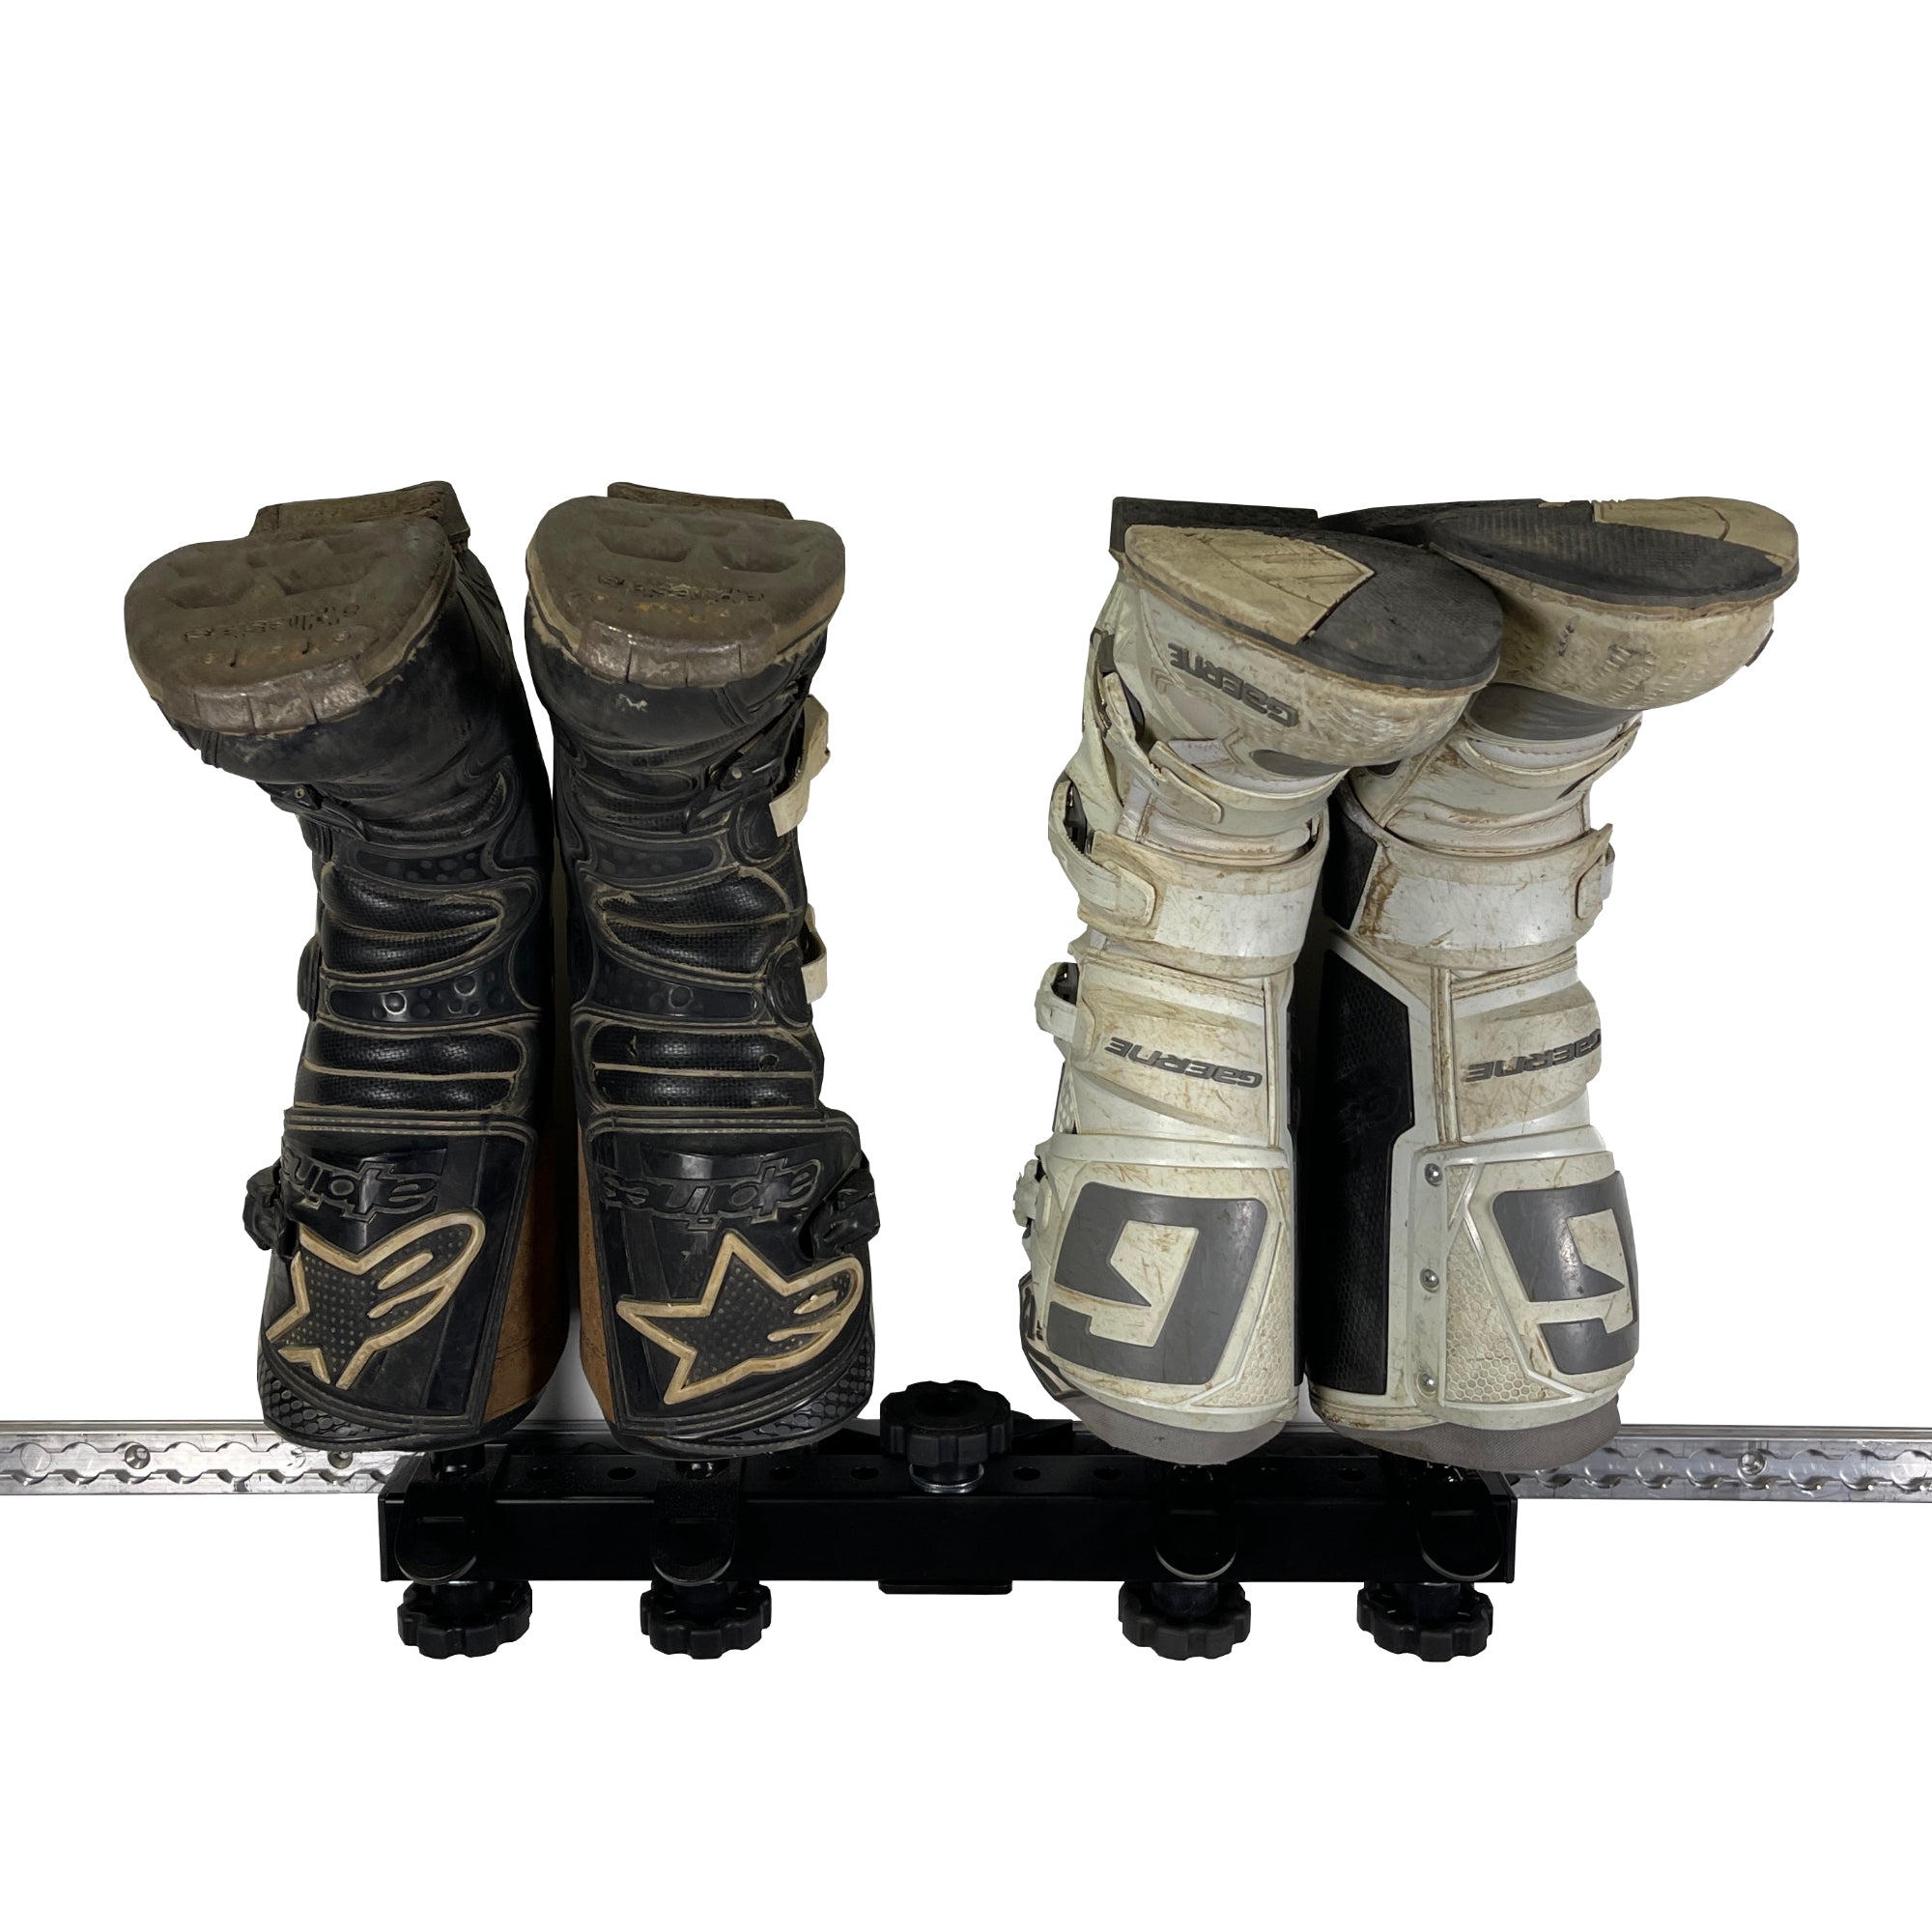 L-Track and Airline track motorcycle boot holder for four pairs